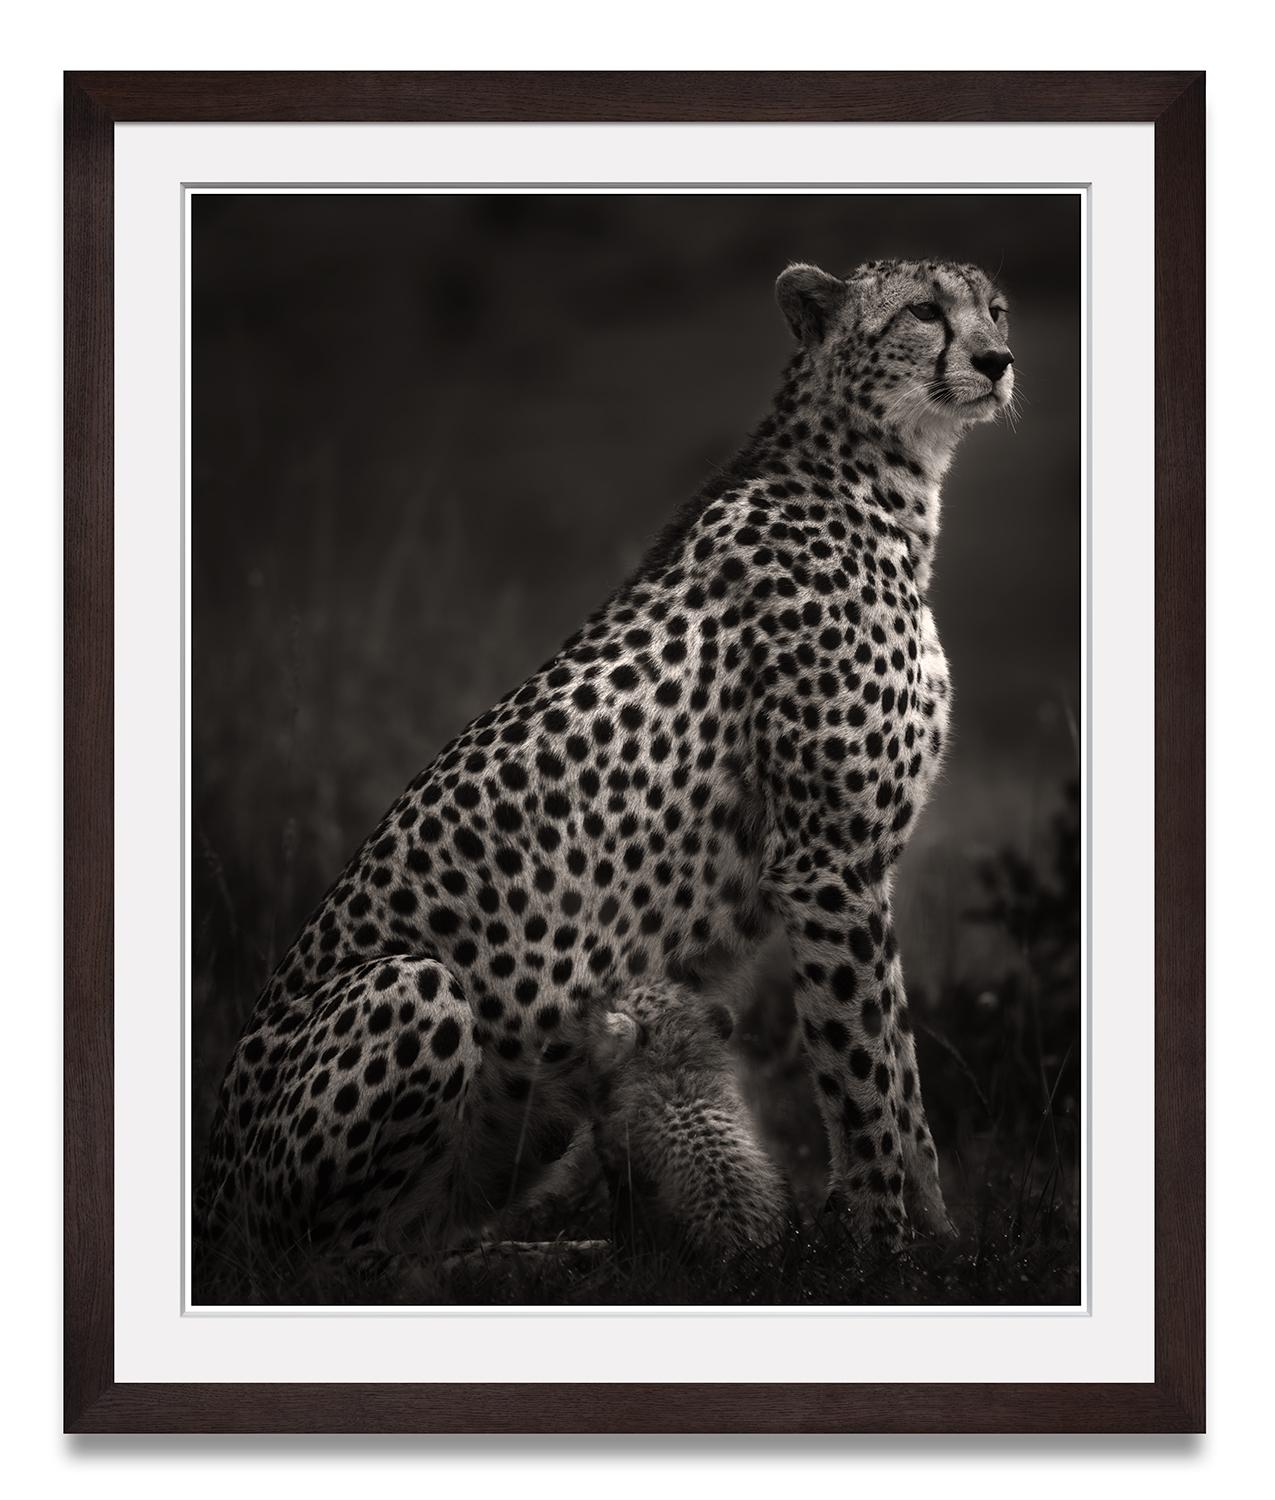 Imani I, Cheetah, animal, wildlife, black and white photography, africa - Photograph by Joachim Schmeisser